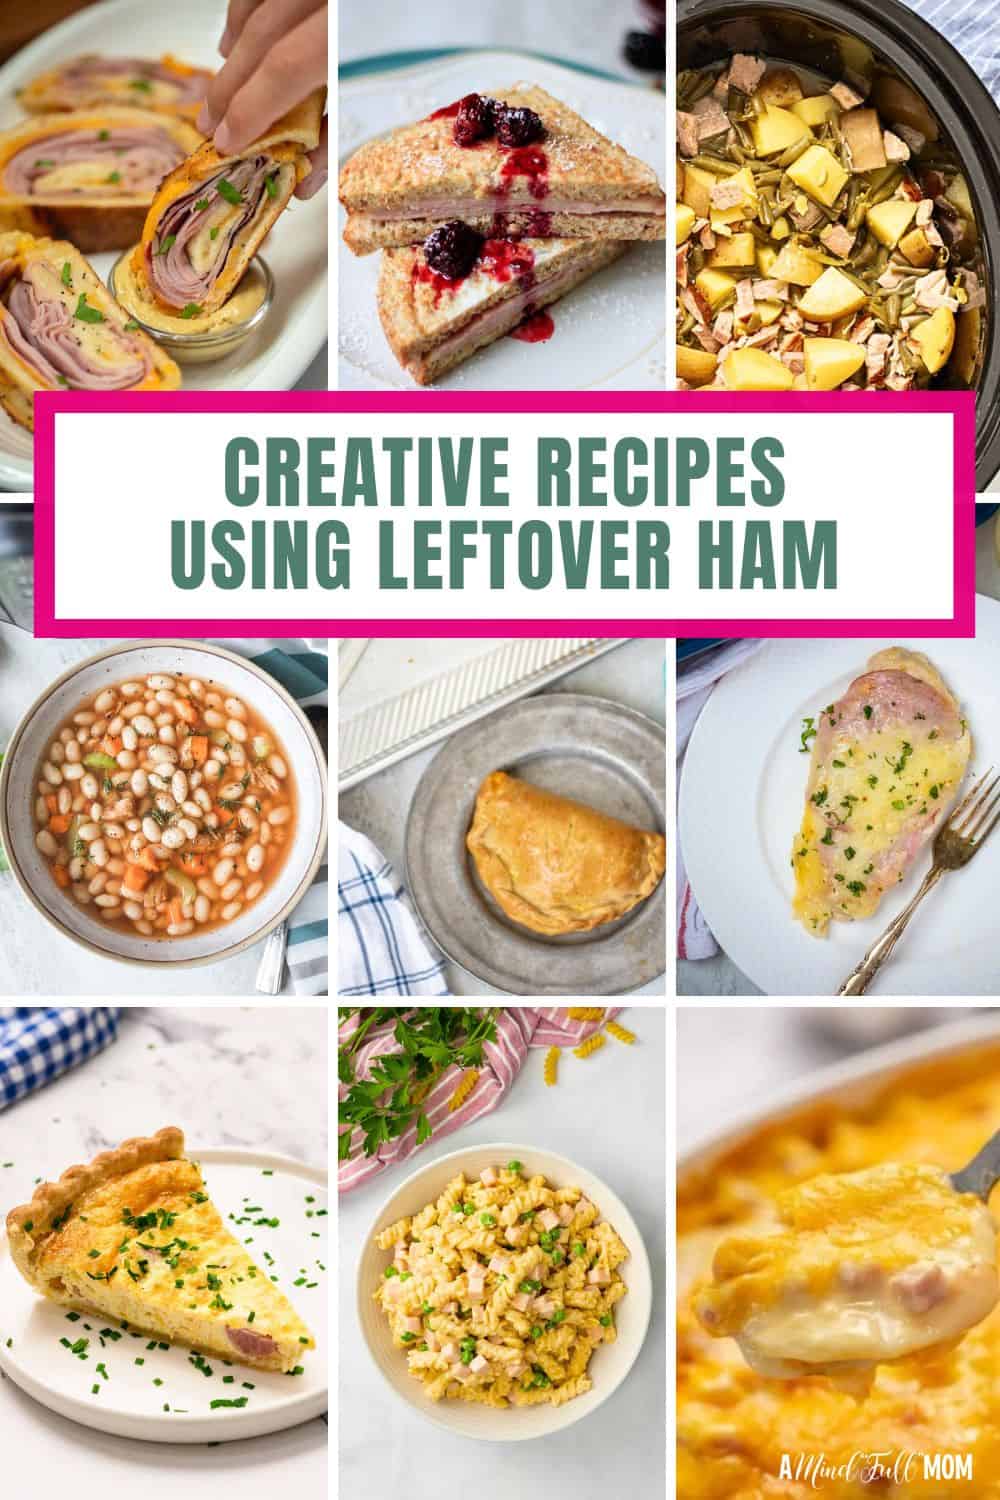 Looking for creative things to do with leftover ham? From breakfast to lunch to dinner, here you will find new and easy recipes to transform leftover ham into memorable dishes.